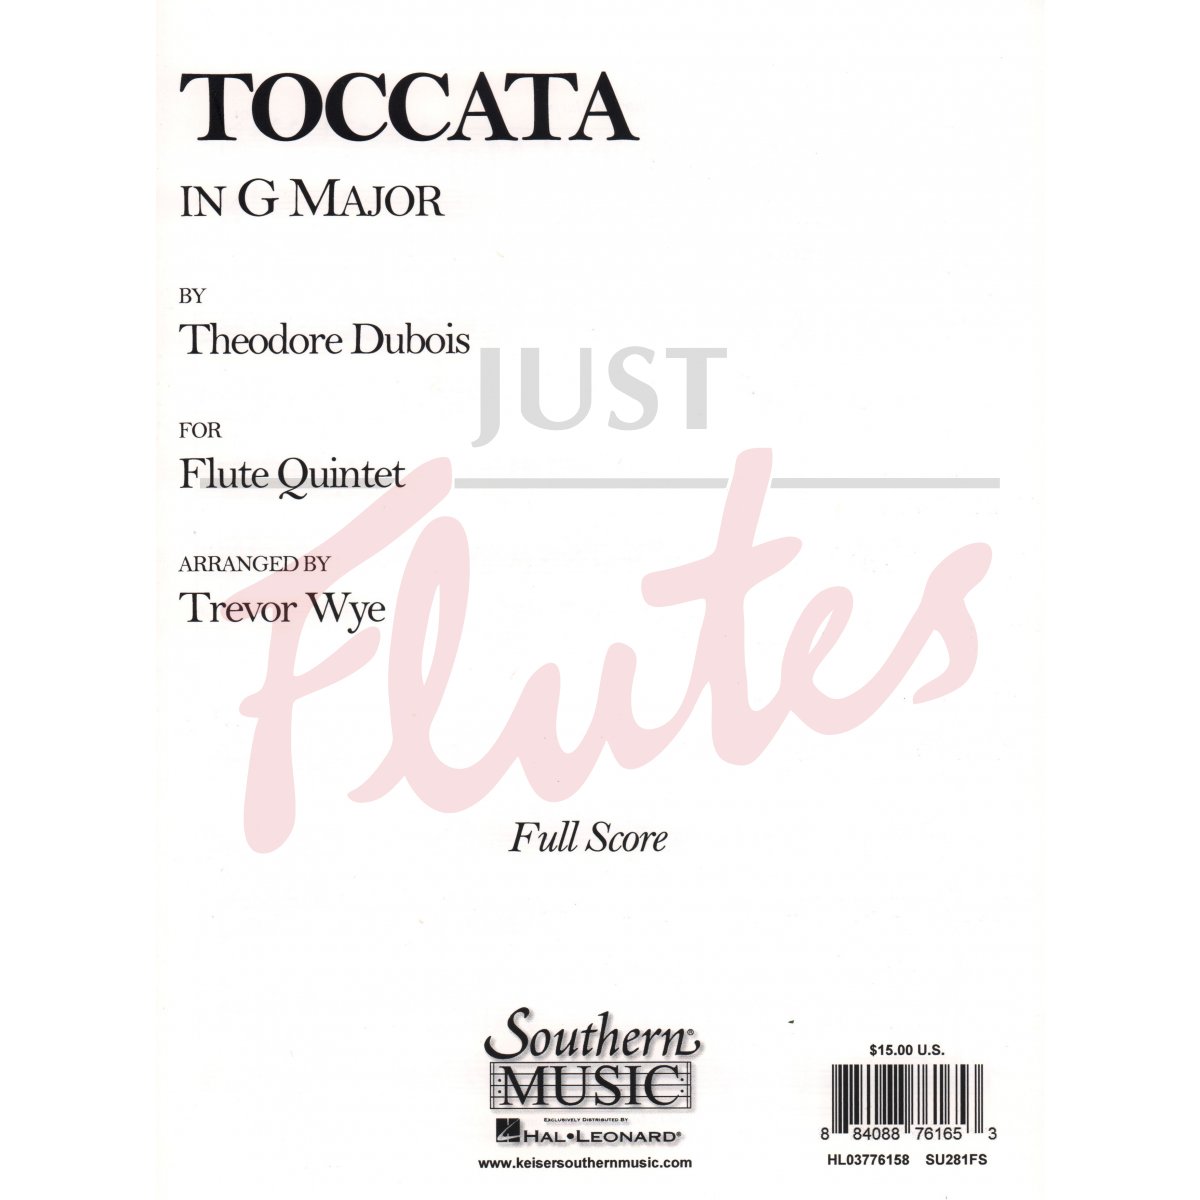 Toccata in G major for Flute Quintet